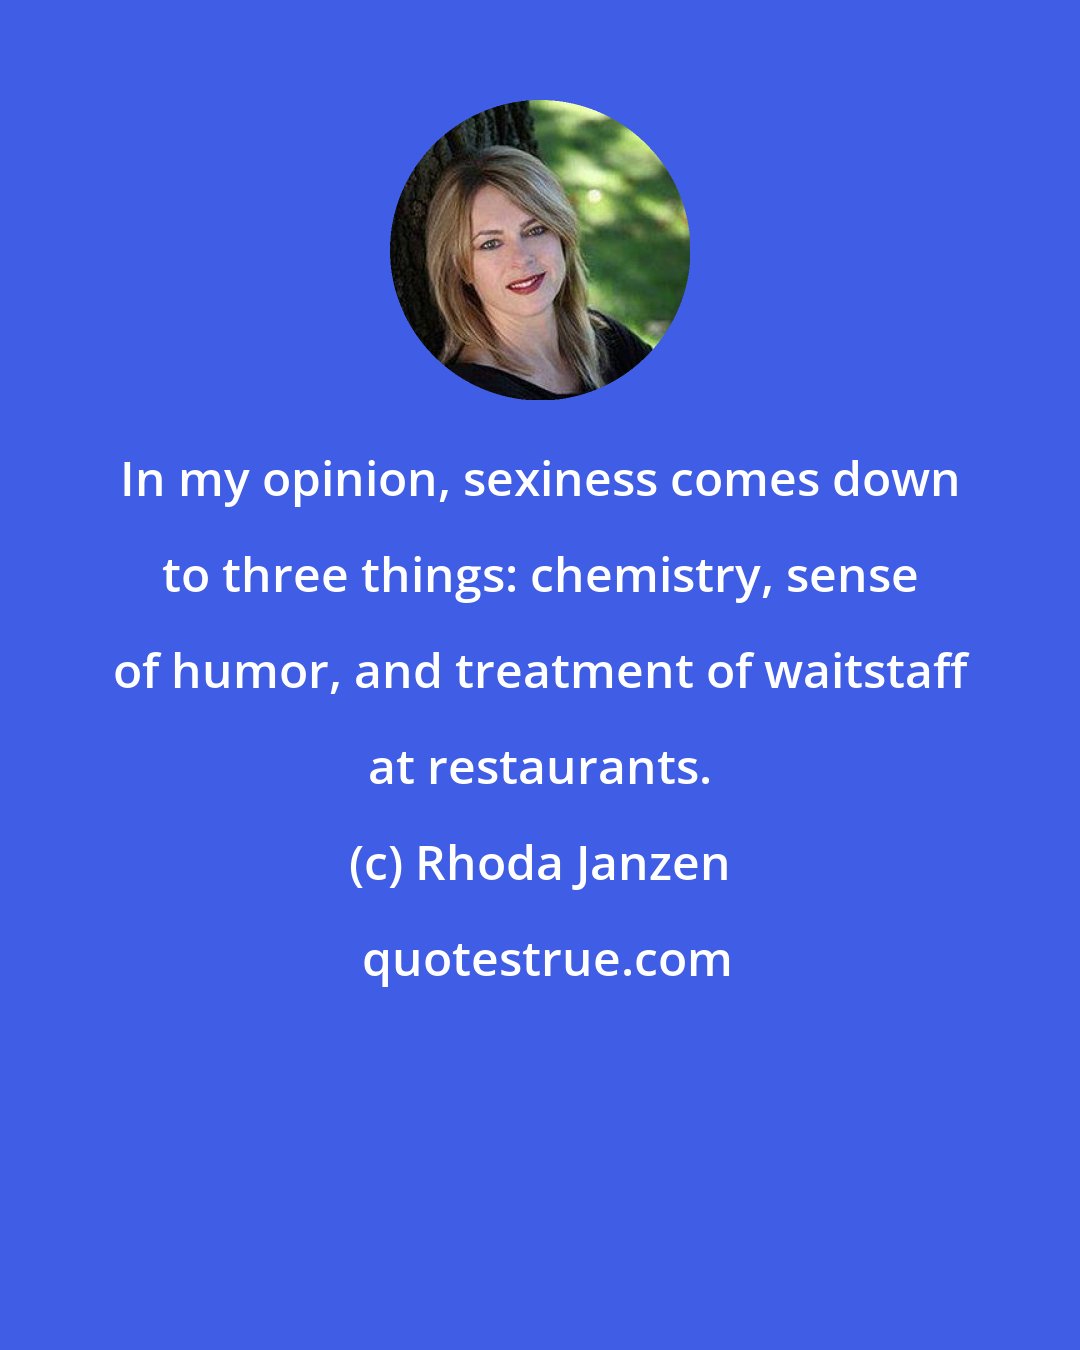 Rhoda Janzen: In my opinion, sexiness comes down to three things: chemistry, sense of humor, and treatment of waitstaff at restaurants.